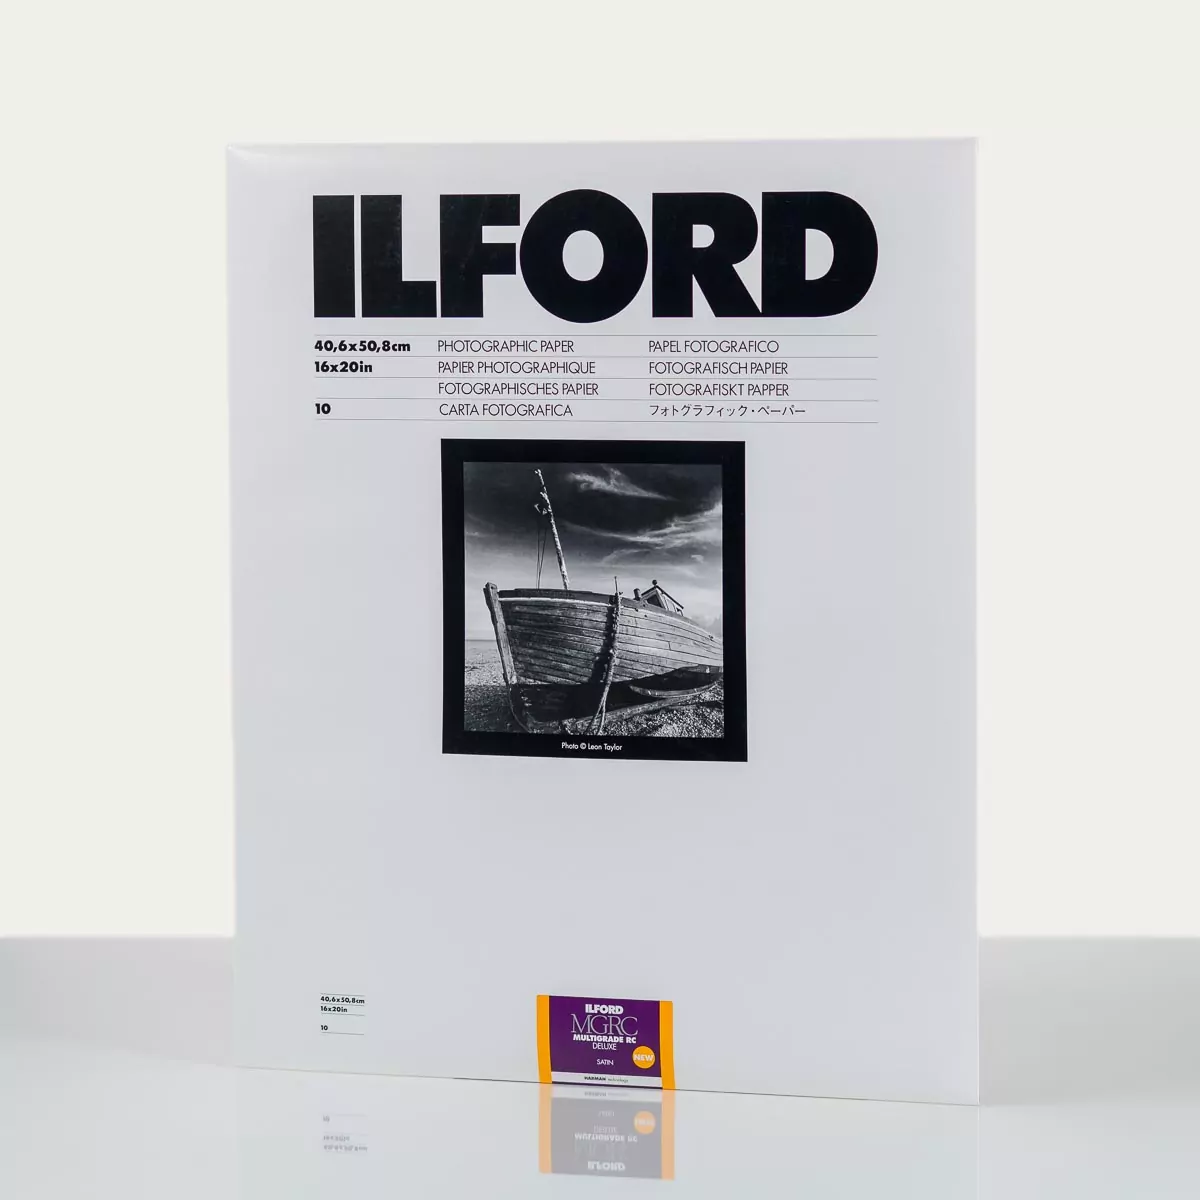 ILFORD MULTIGRADE RC DELUXE MGRCDL25M 40.6×50.8cm (10 sheets)